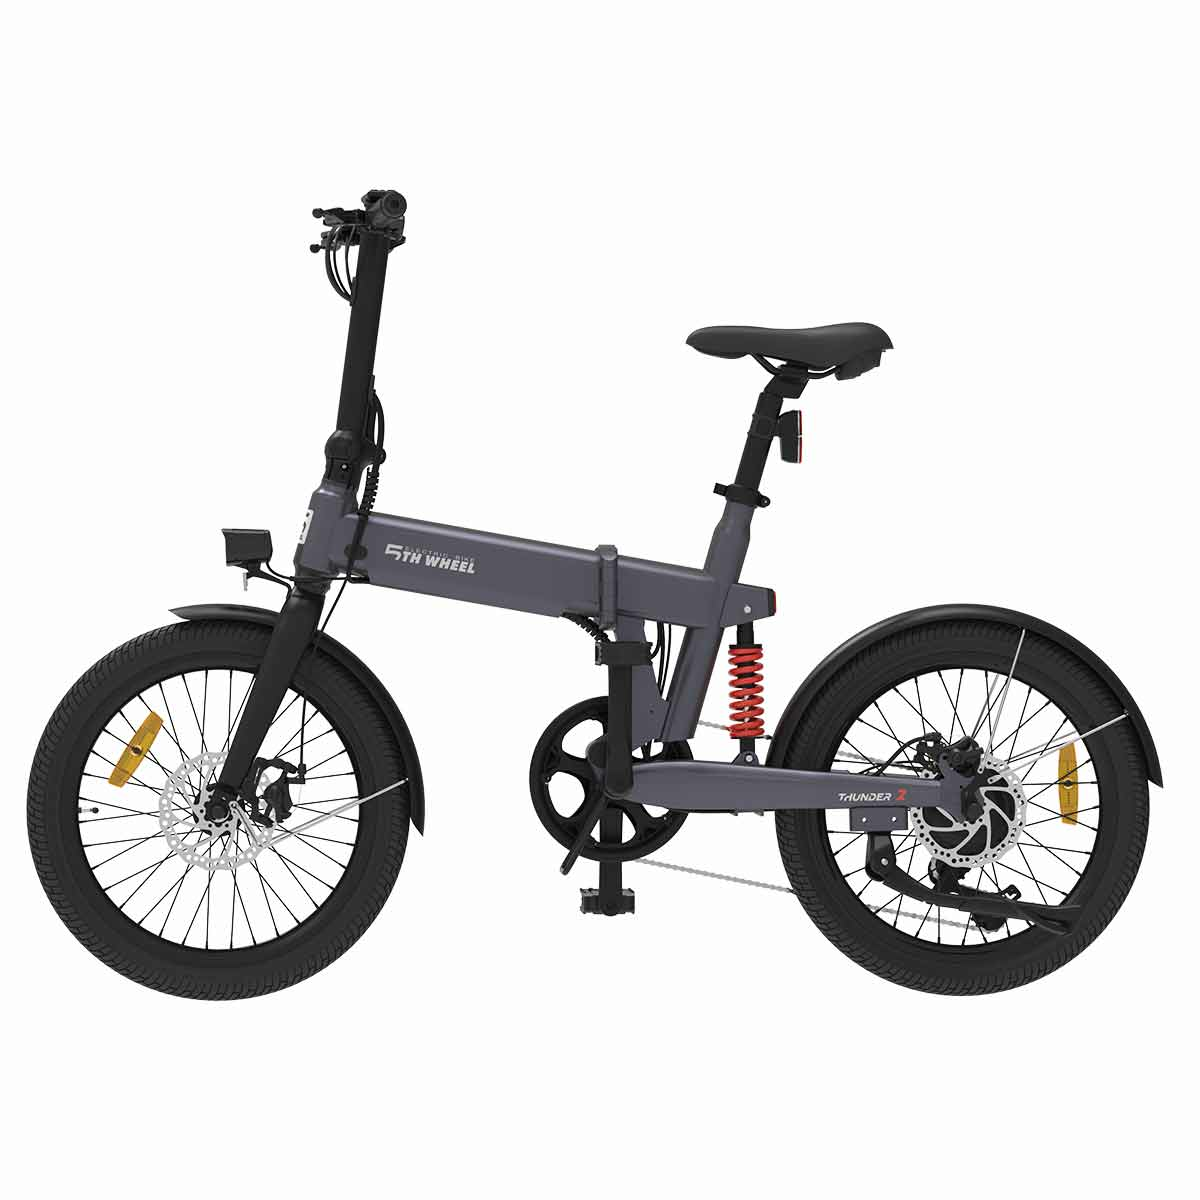 best price,5th,wheel,thunder,2,eb05,36v,10.4ah,350w,electric,bicycle,20inch,eu,coupon,price,discount